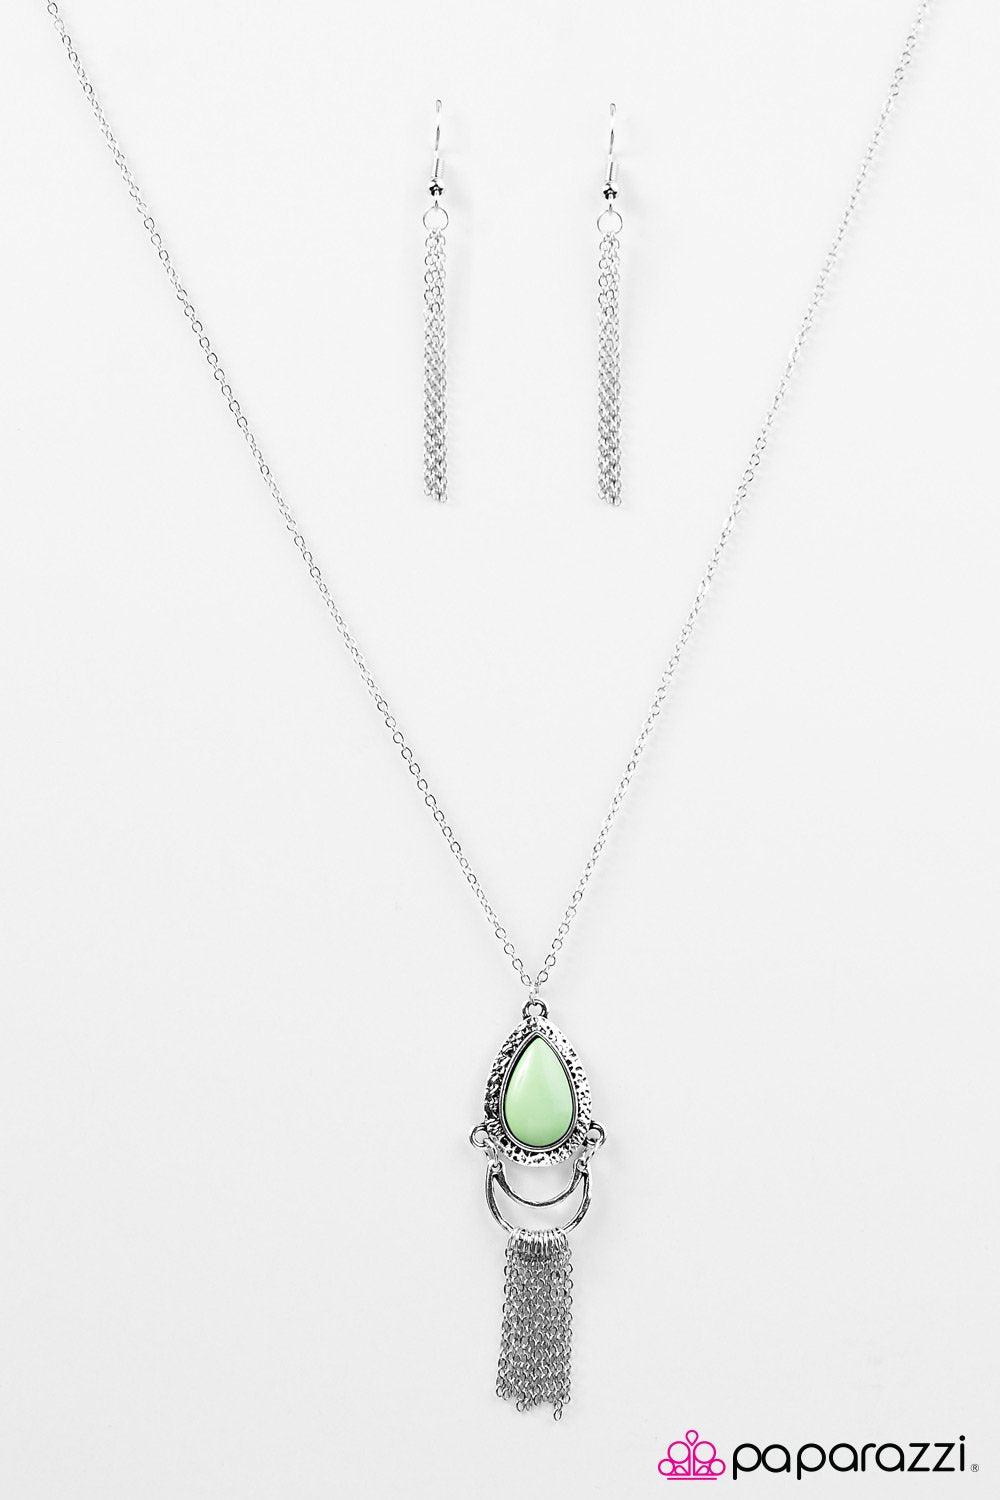 Summer Fiesta Silver and Green Necklace - Paparazzi Accessories-CarasShop.com - $5 Jewelry by Cara Jewels